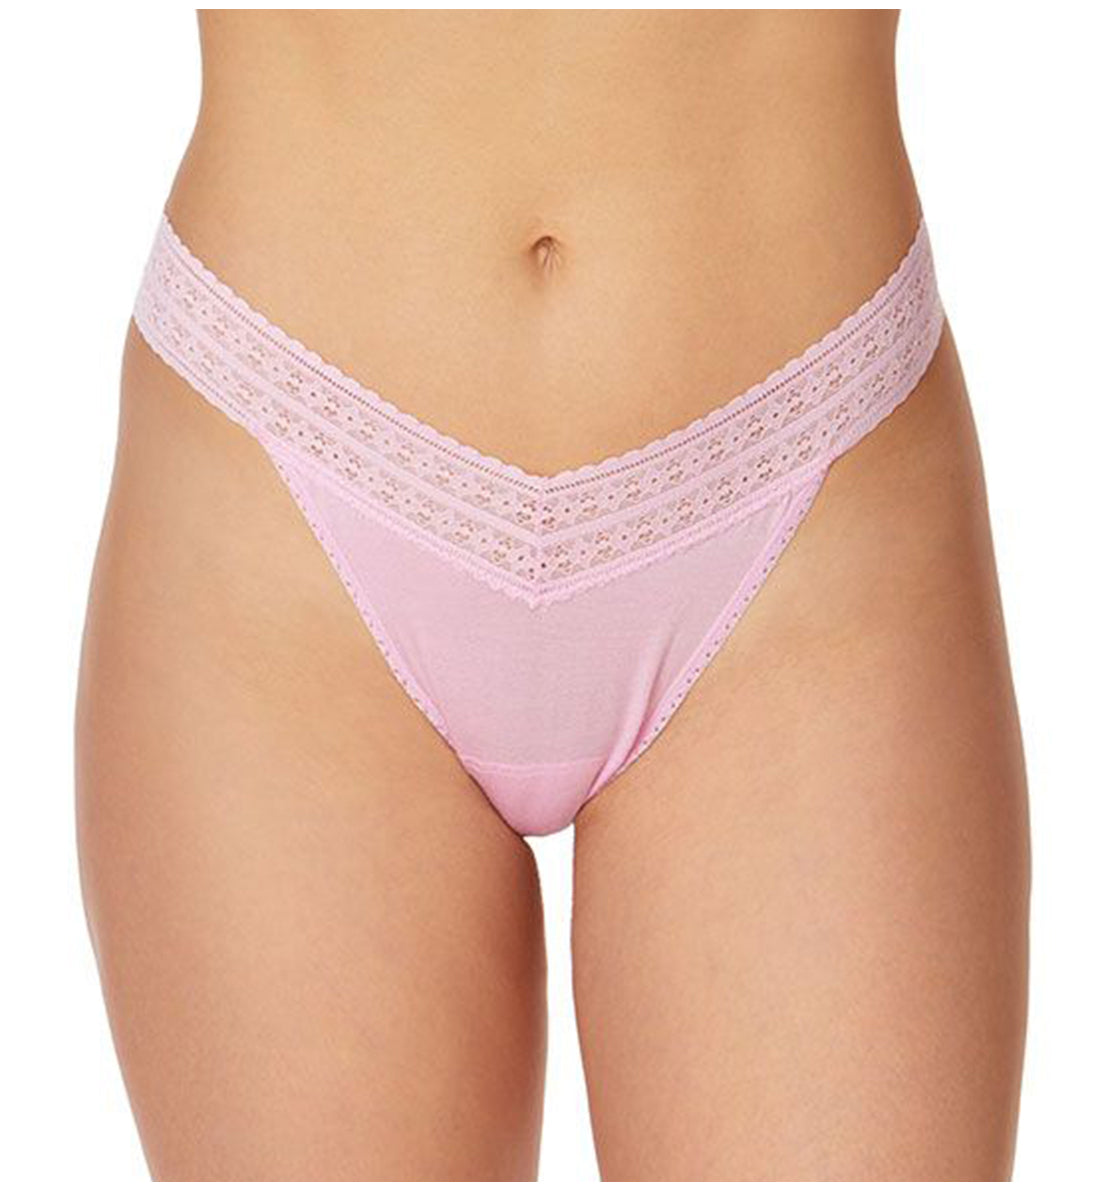 Hanky Panky Dream Original Rise Thong (631104),Cotton Candy Pink - Cotton Candy Pink,One Size